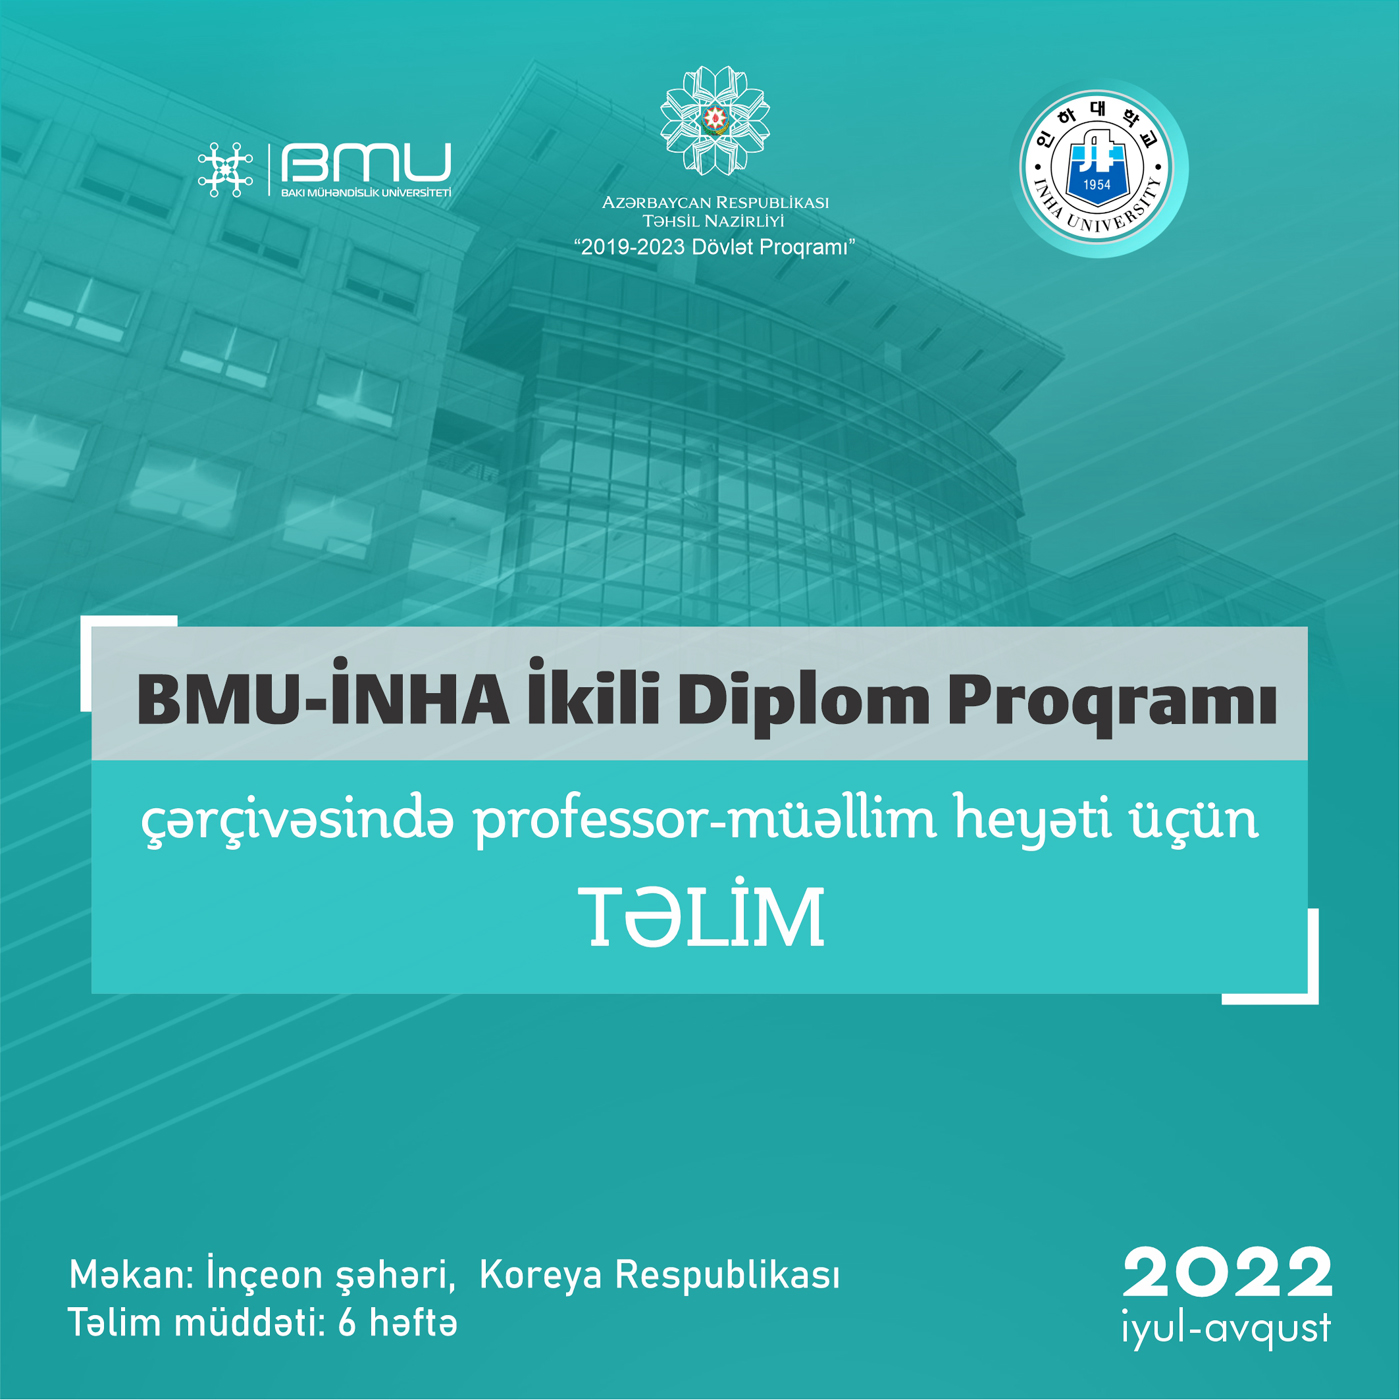 Training to be held at INHA University as part of BEU-INHA DDP